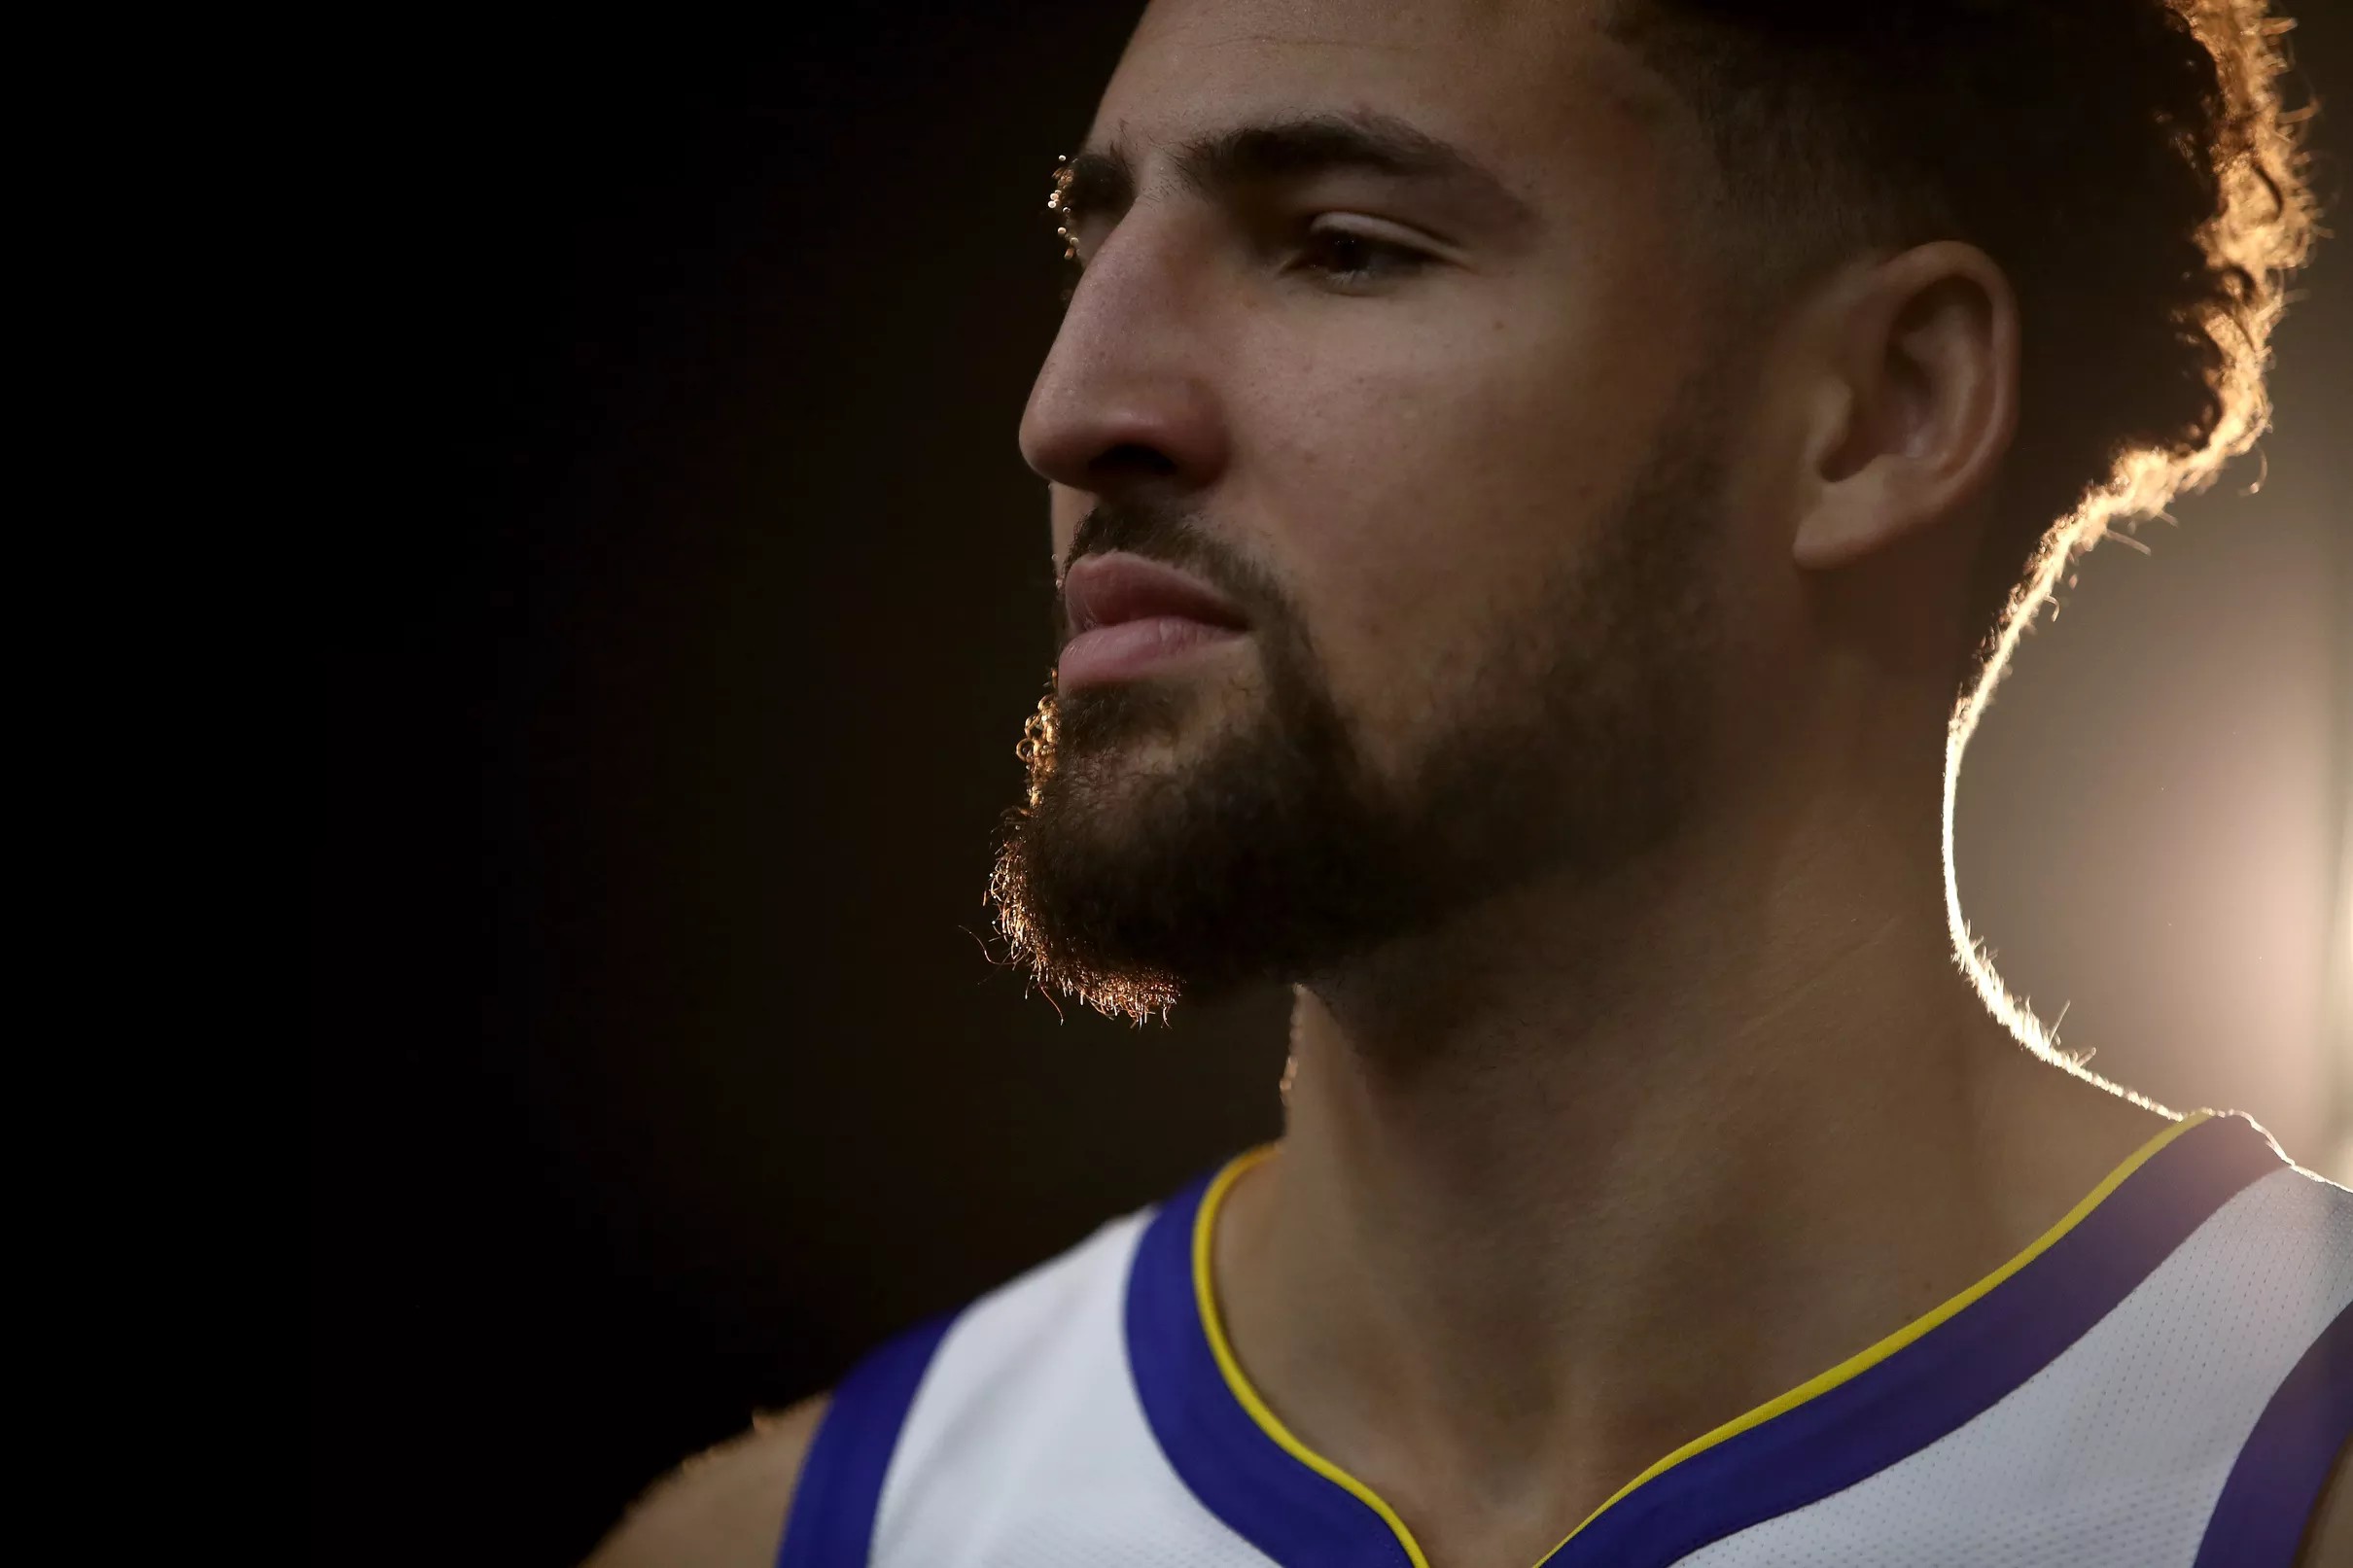 Klay Thompson reiterates his desire to stay in the Bay